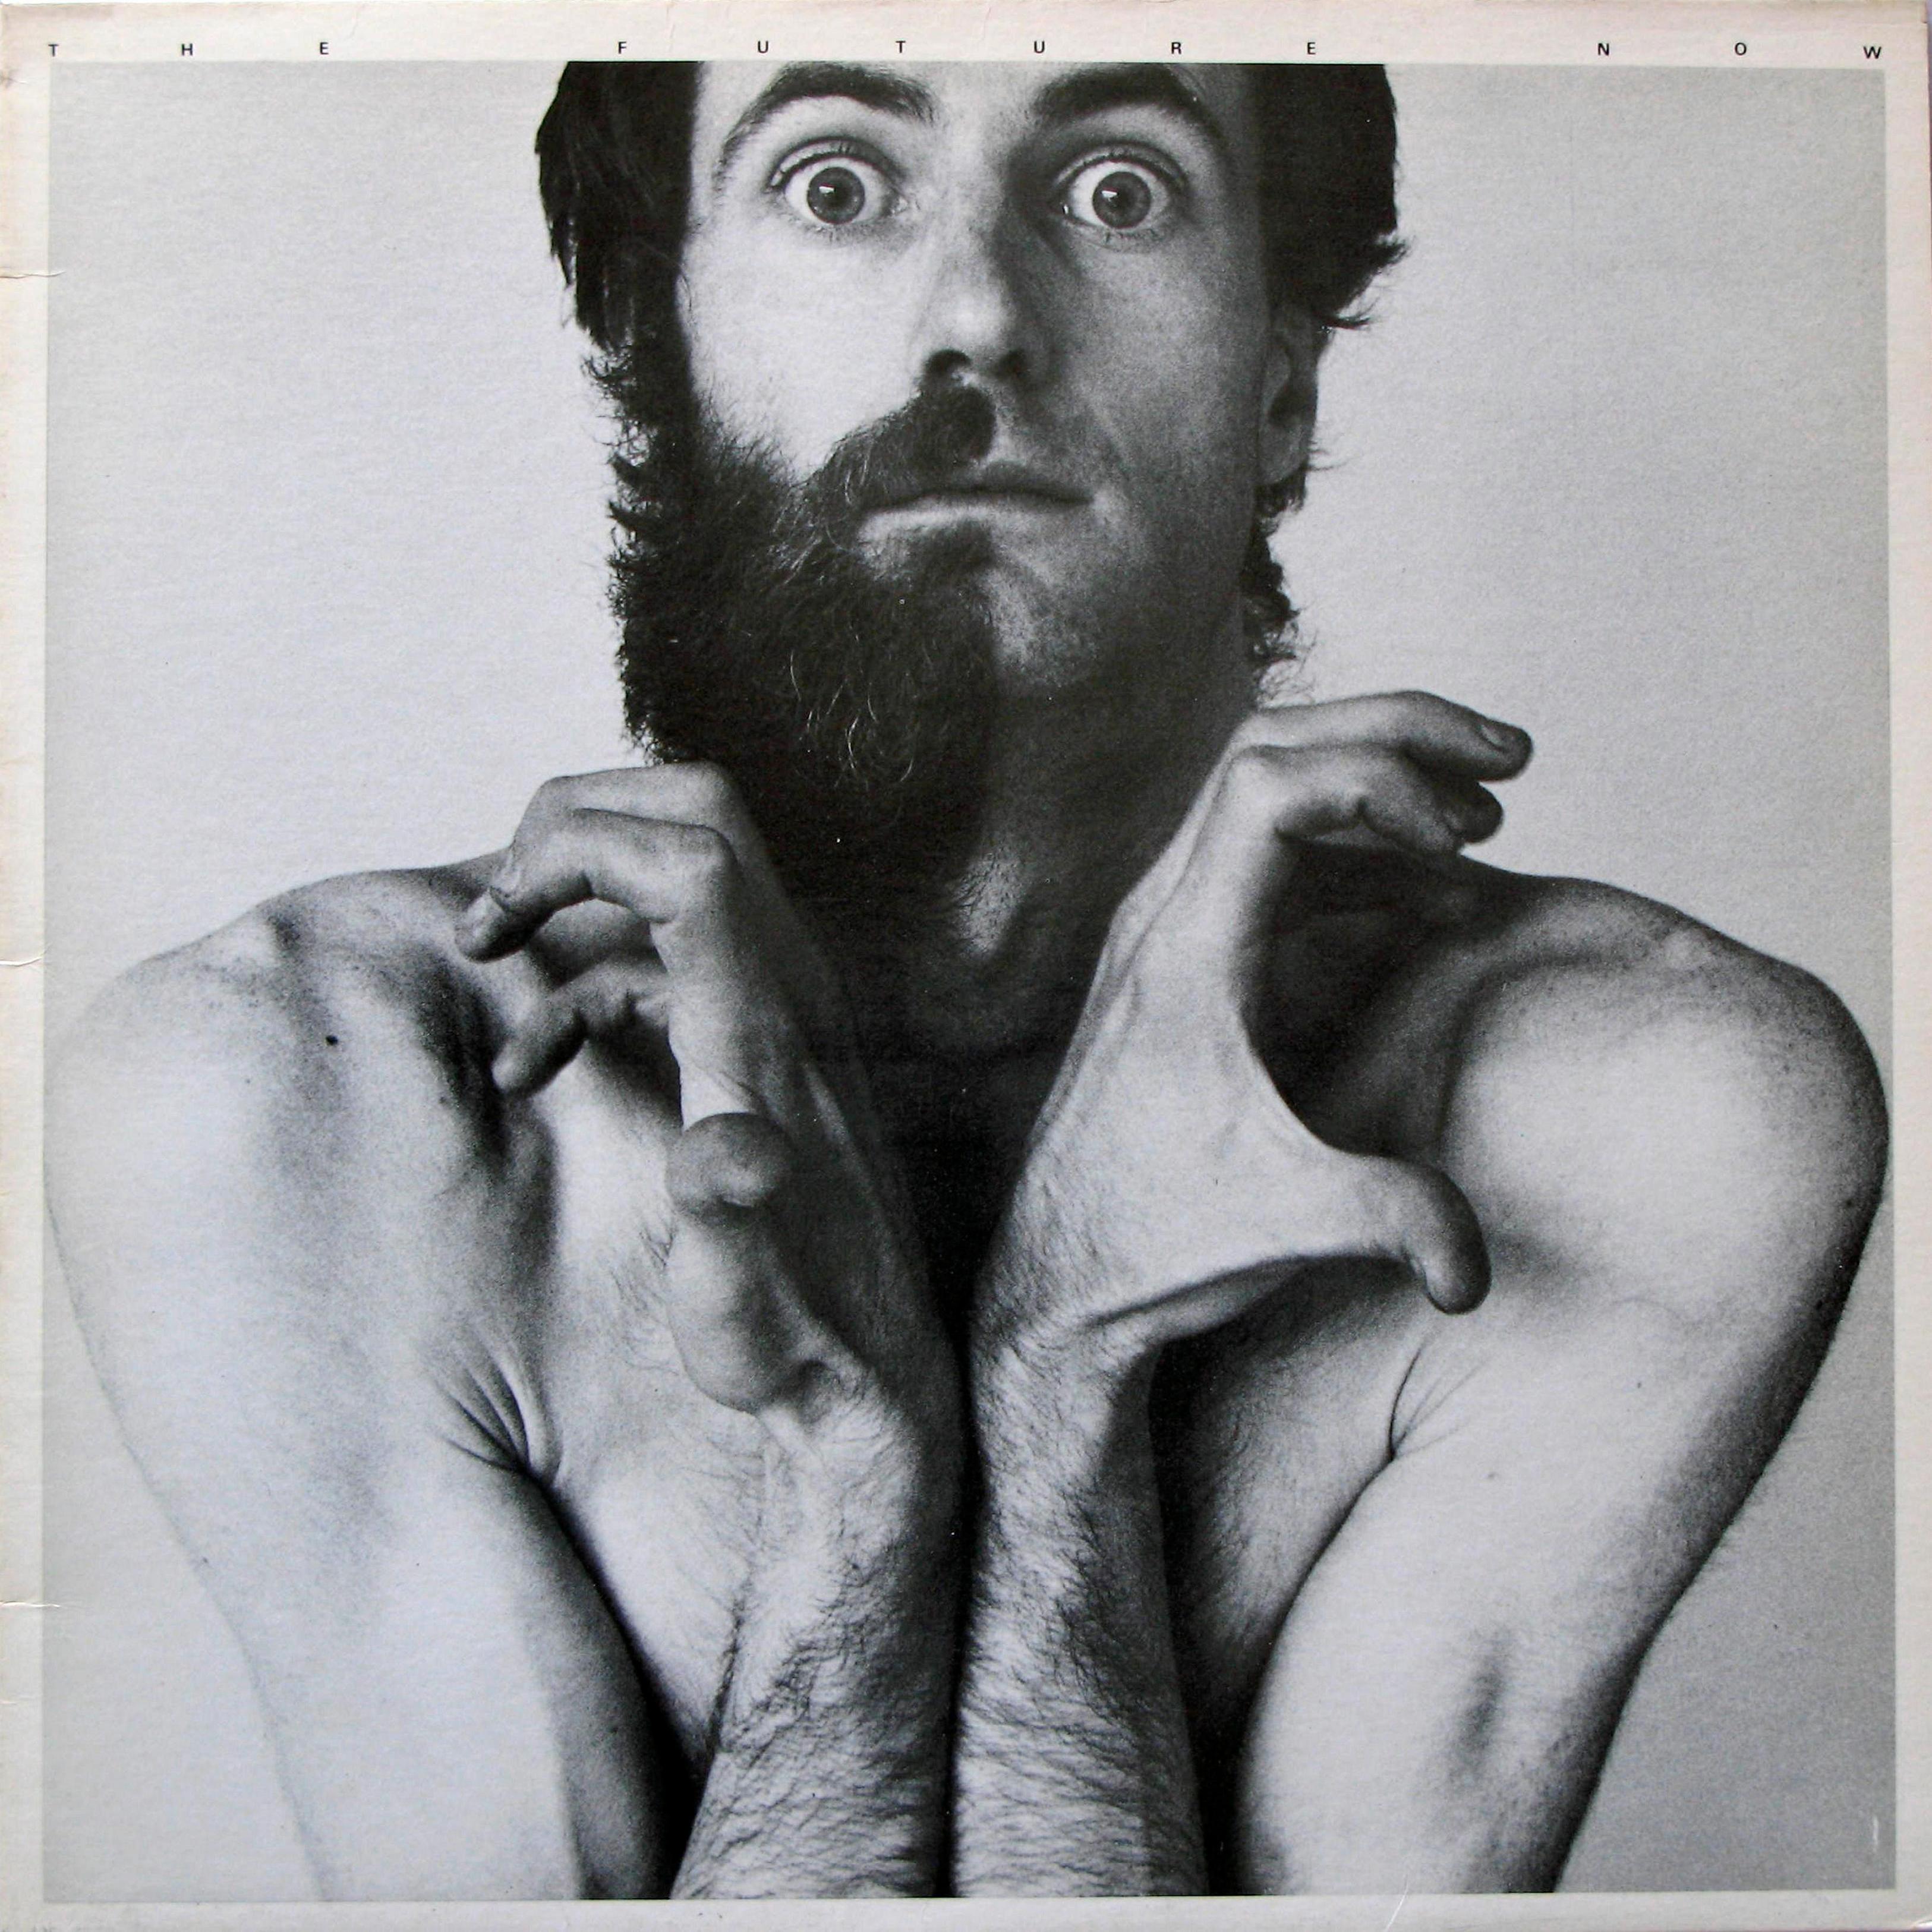 Peter Hammill - The Future Now (1978)